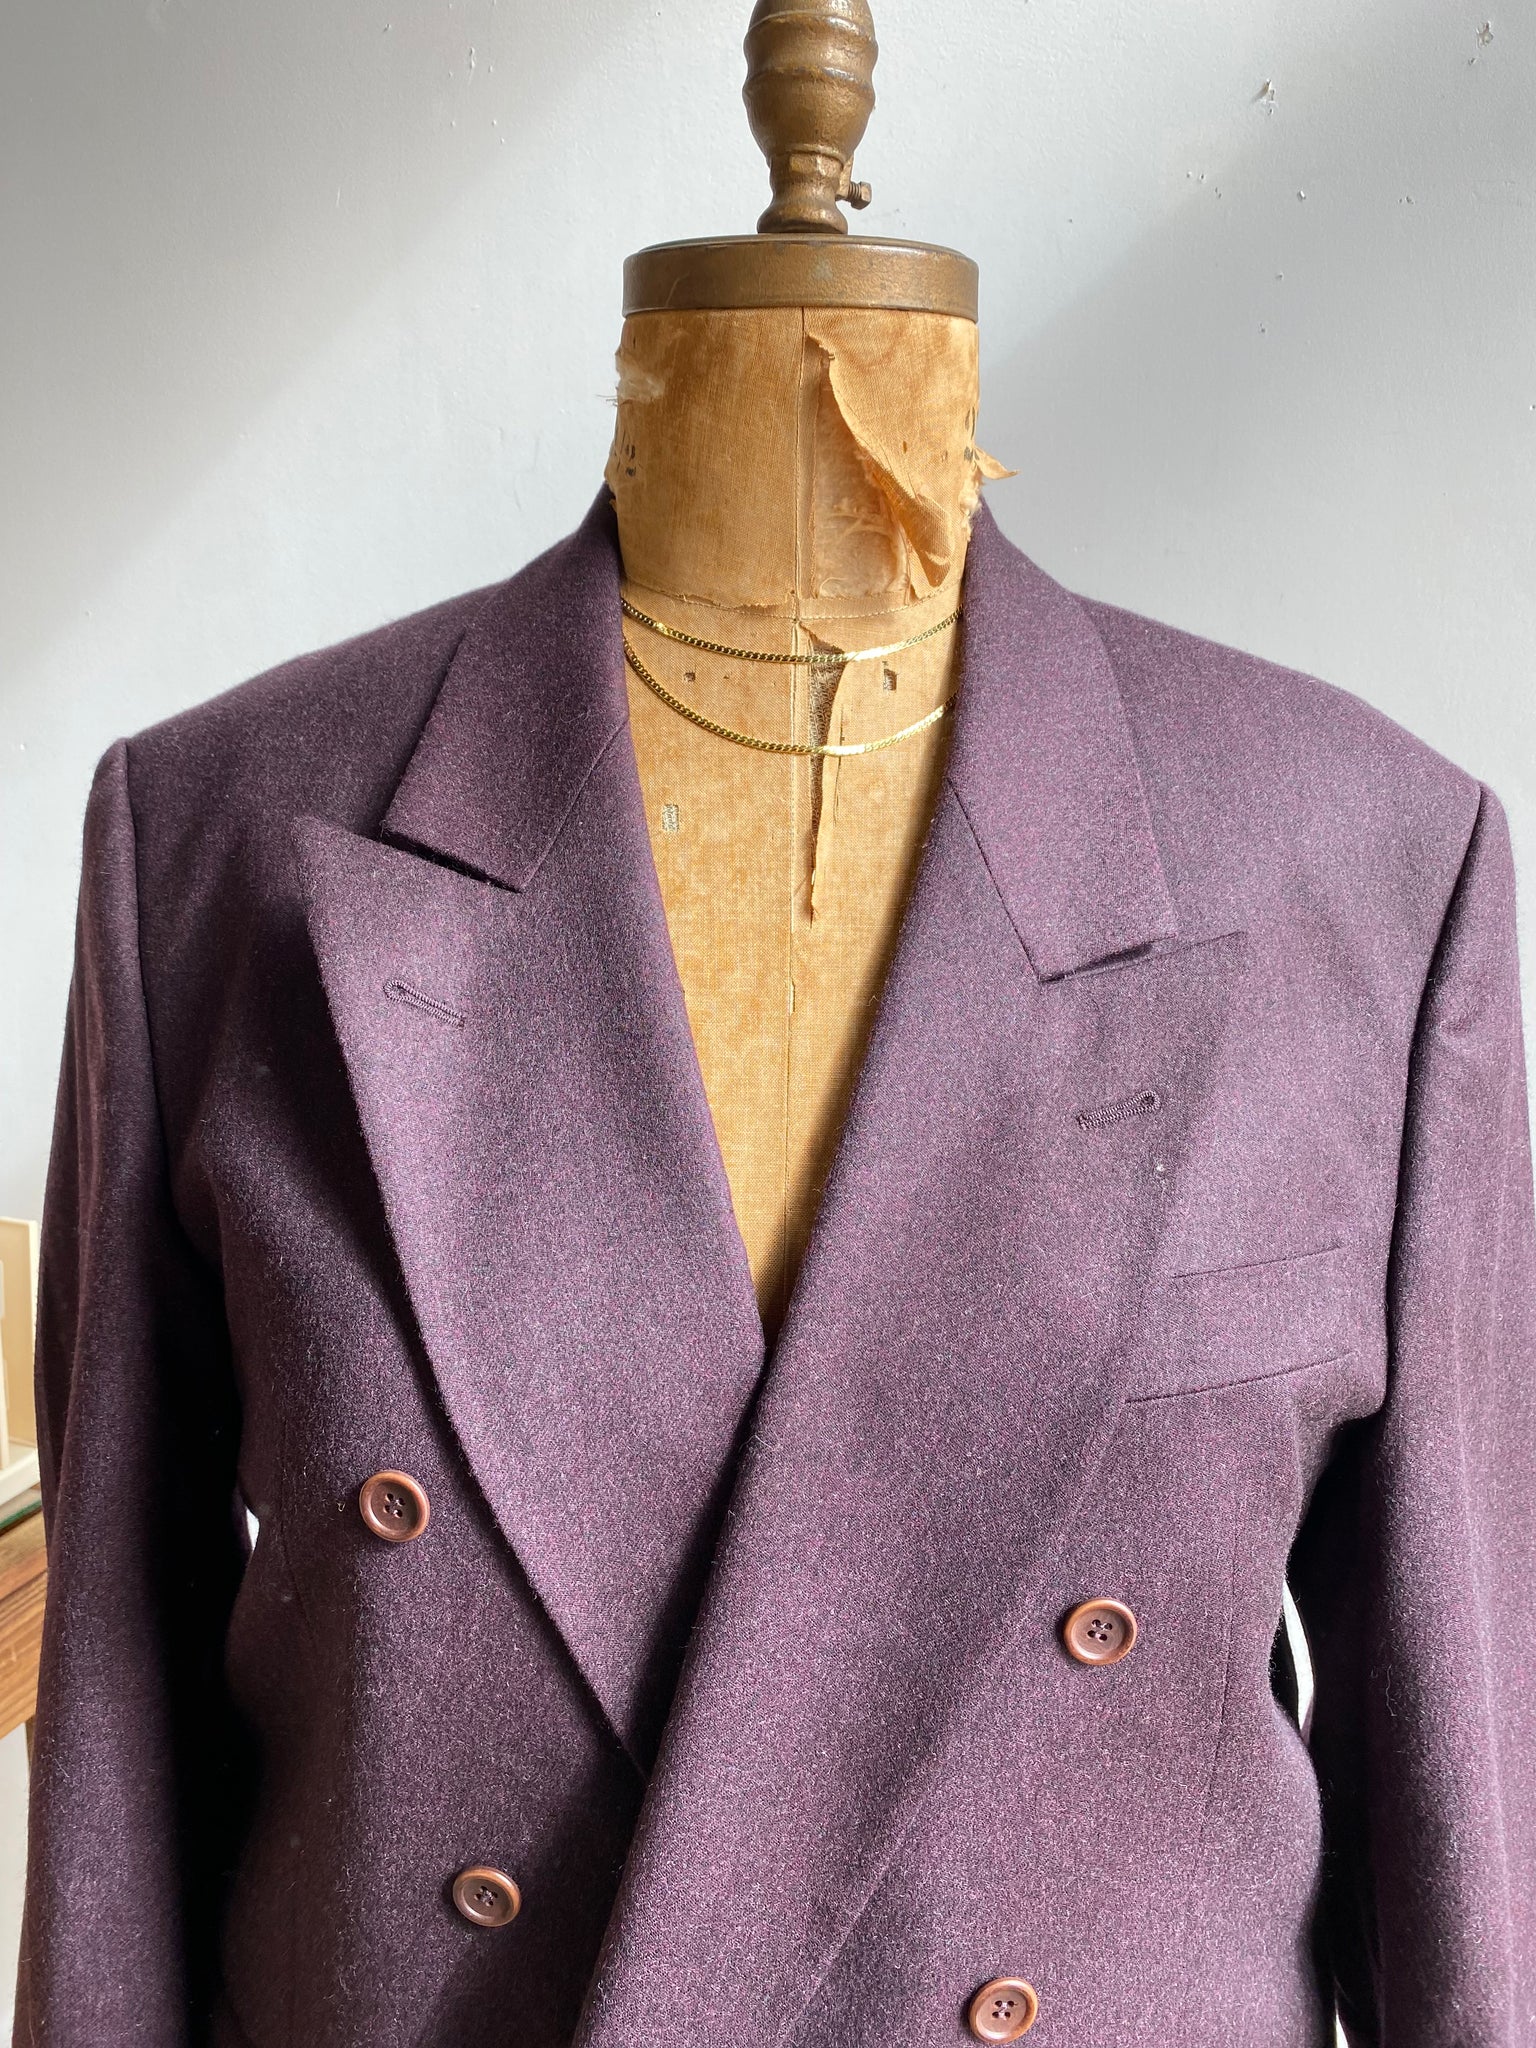 90s Plum Wool "New Fast" Double Breasted Blazer